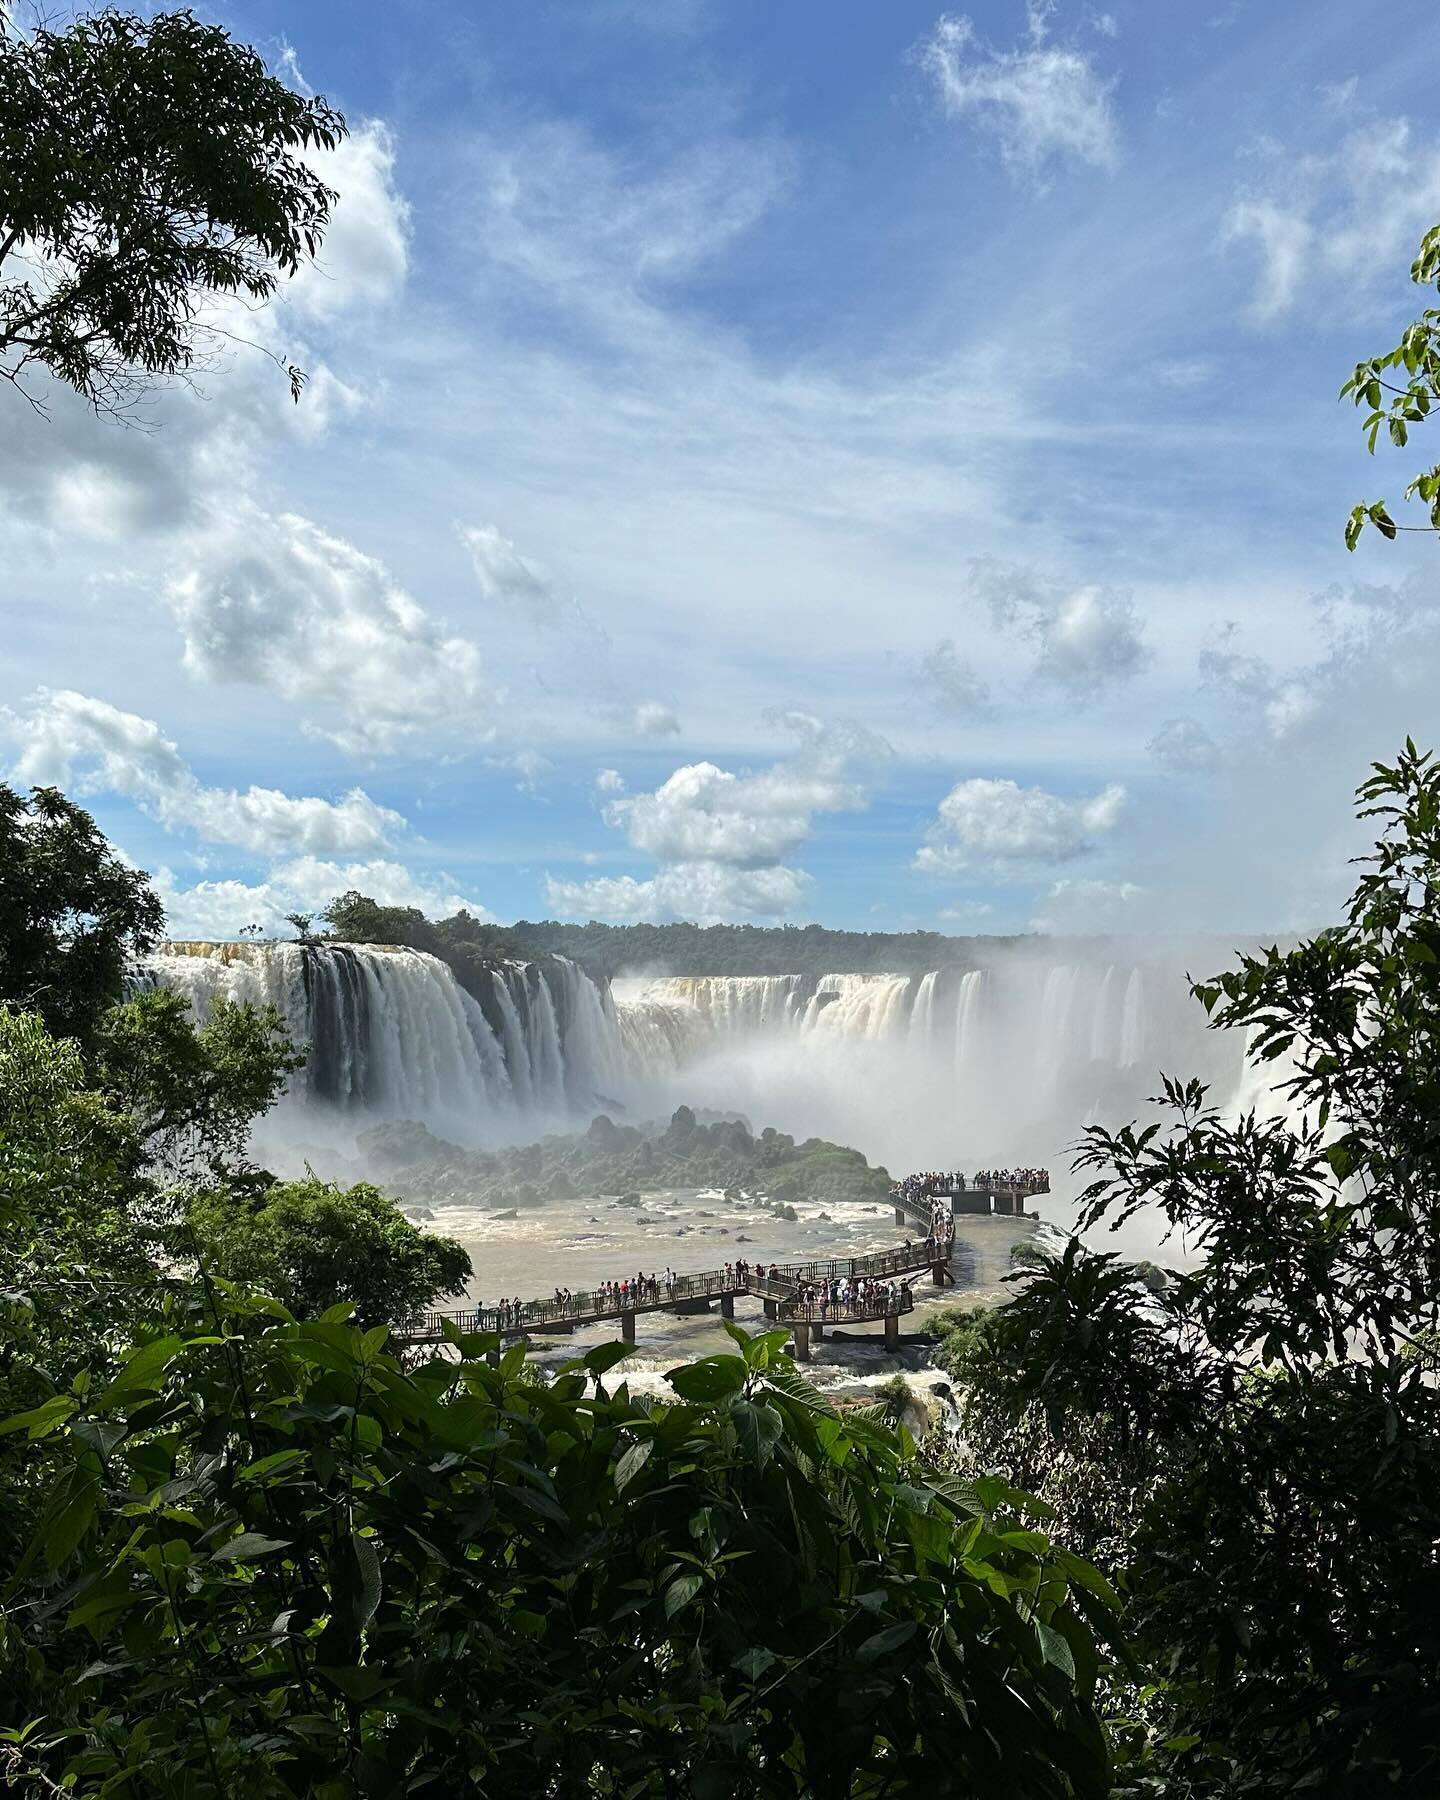 Amazonian forests, skyscrapers and waterfalls: What not to miss in Brazil